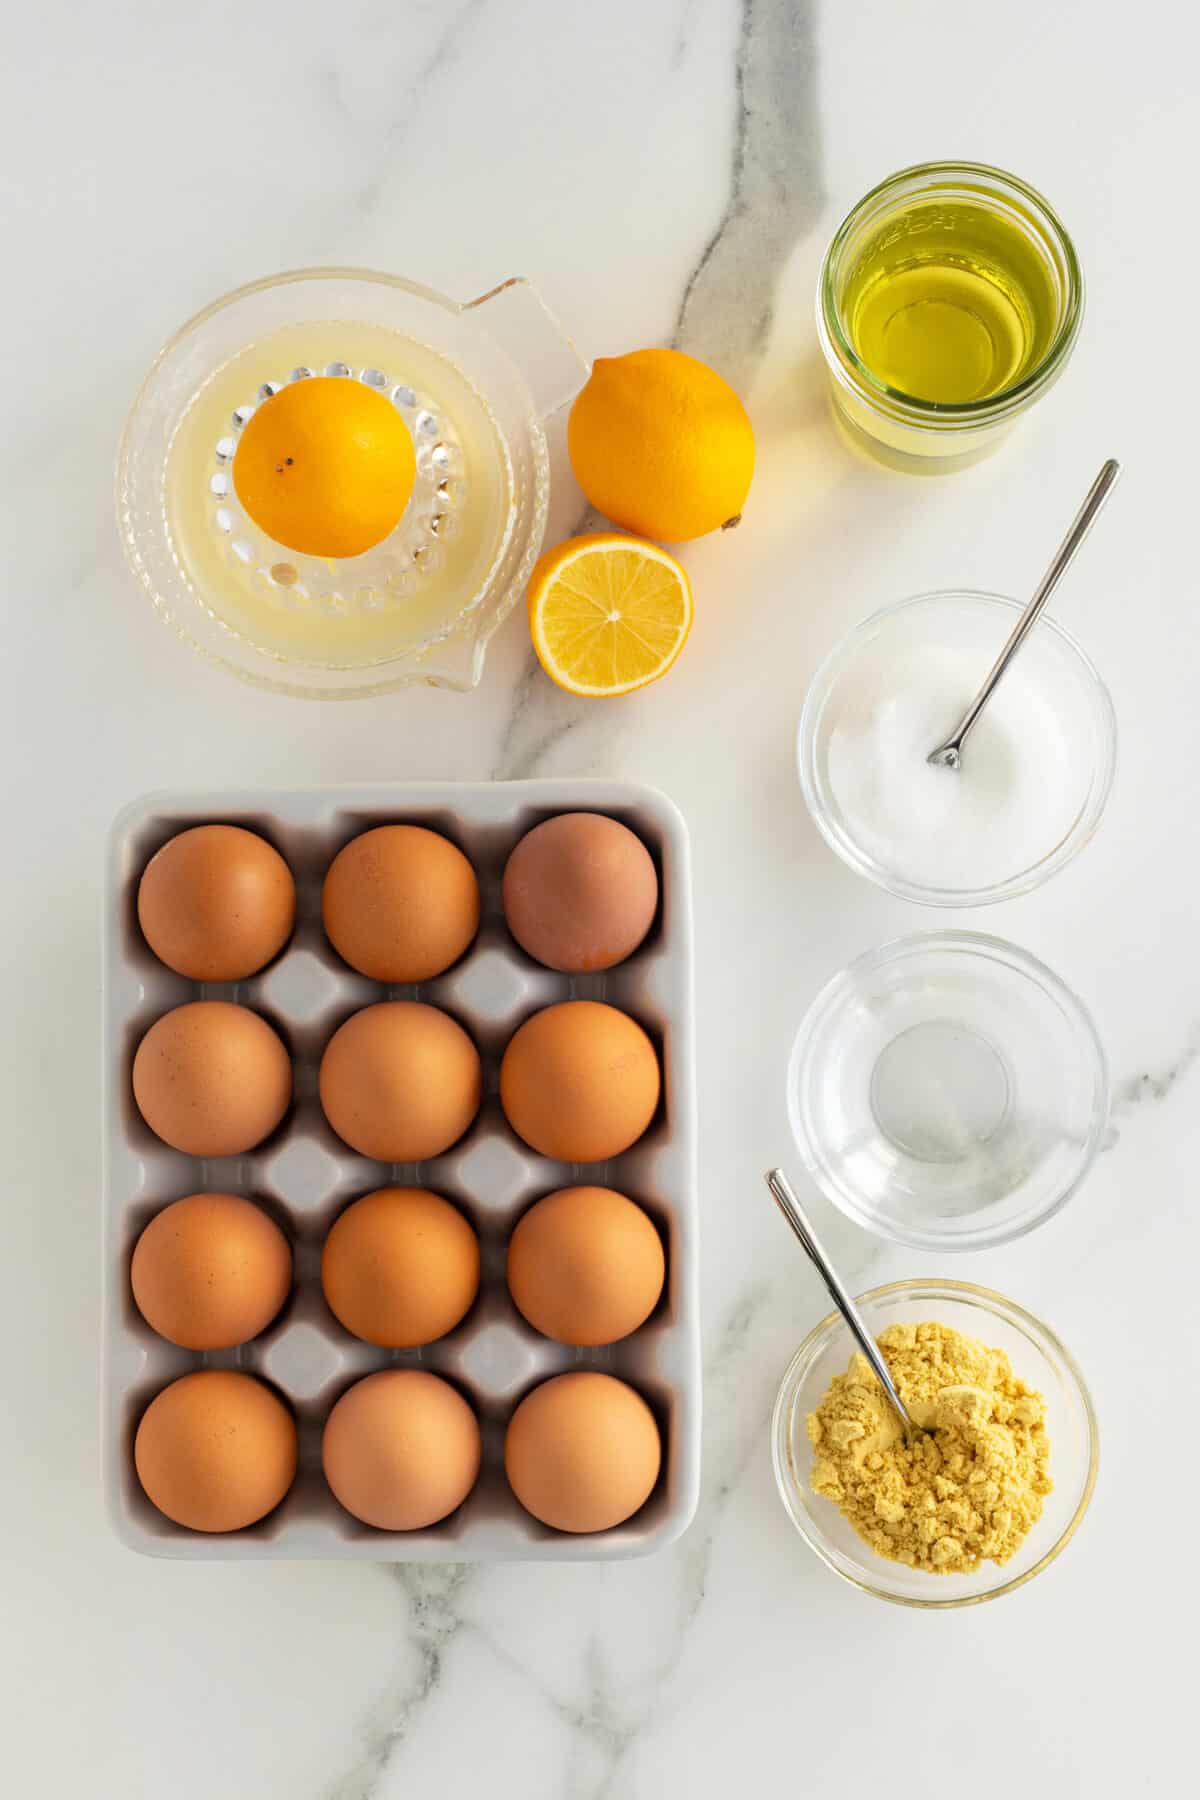 homemade mayonnaise ingredients in small clear bowls with a carton of eggs